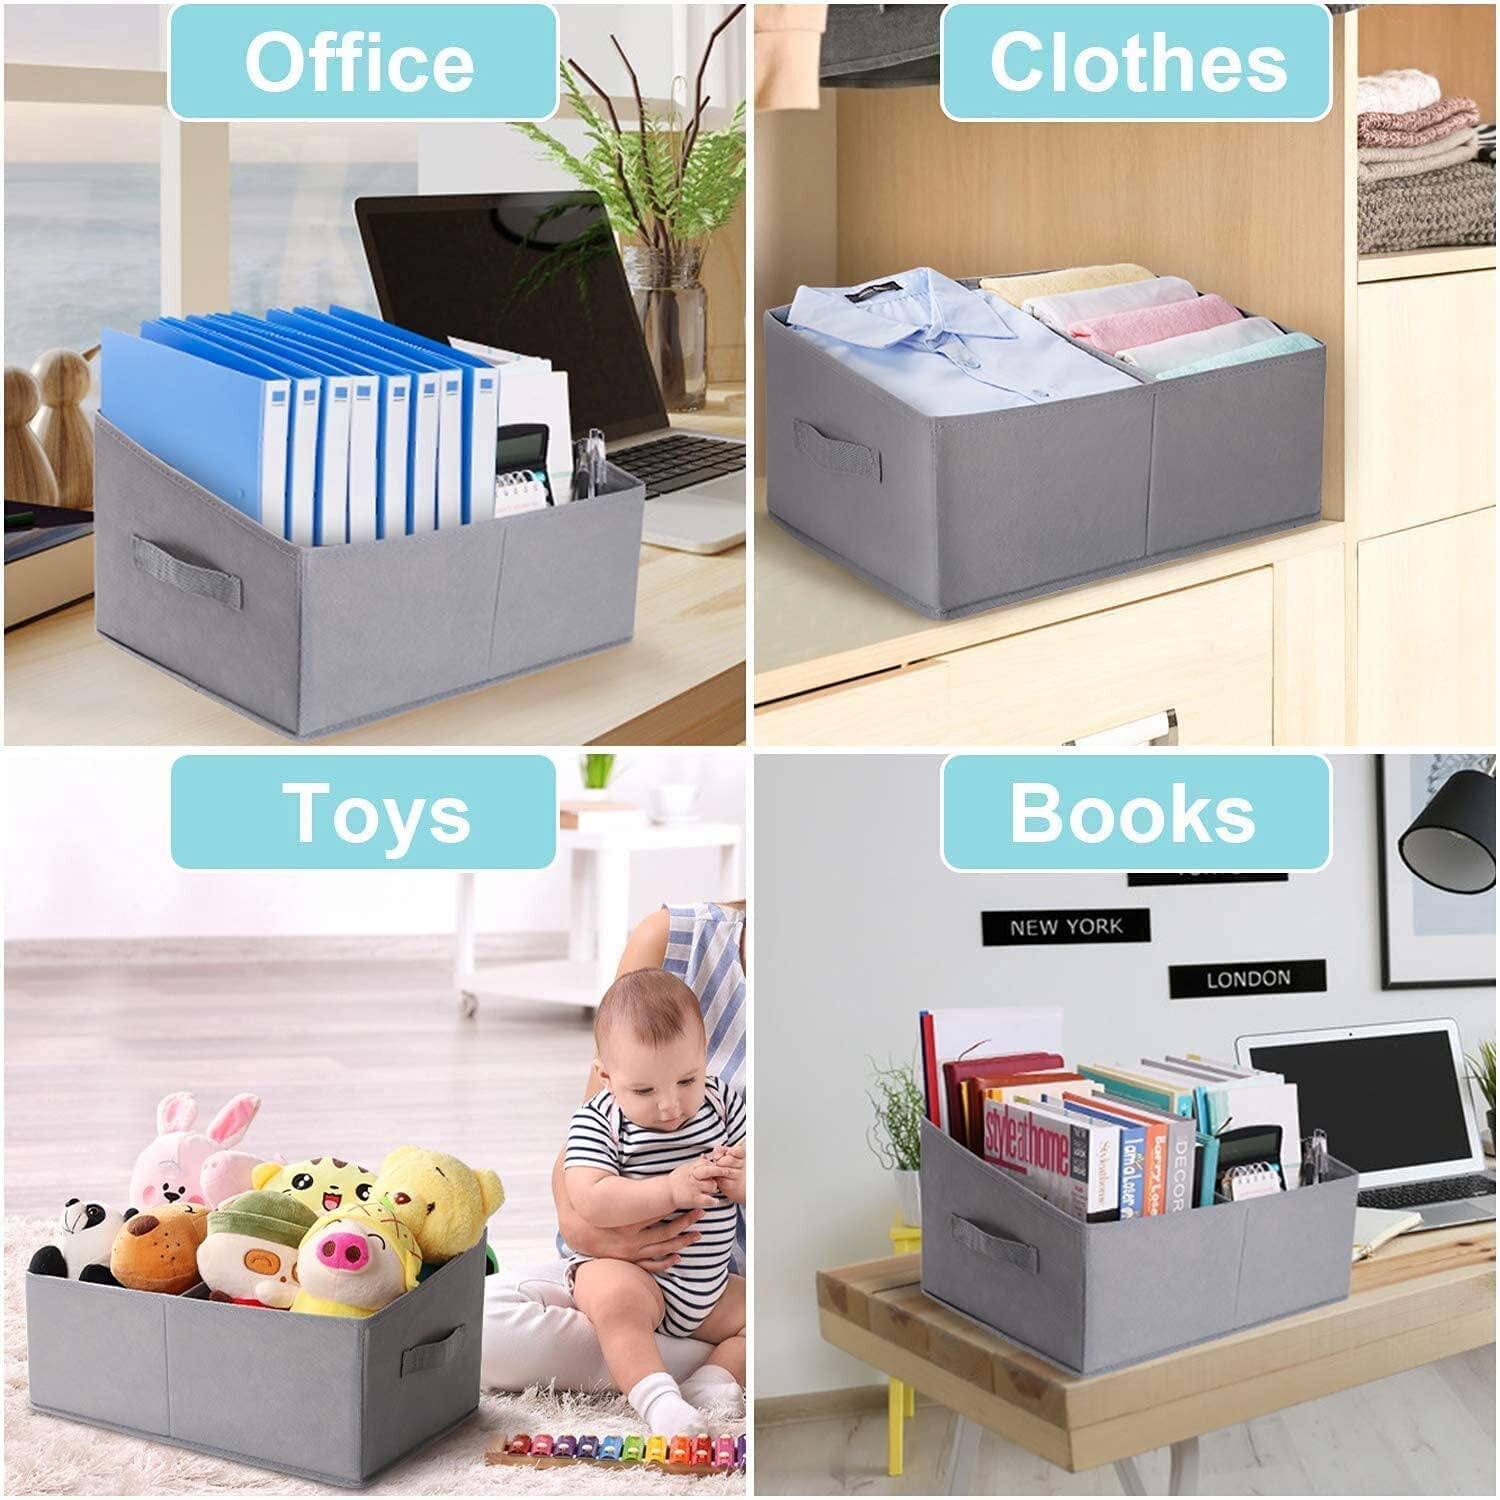 DIMJ Closet Organizer Storage Bins, 6 Pcs Fabric Storage Containers Cube  Trapezoid Organizer Basket for Bedroom Bathroom Cloth, Baby Toiletry, Toys,  Towel, DVD, Book, Home Organization, Gray 